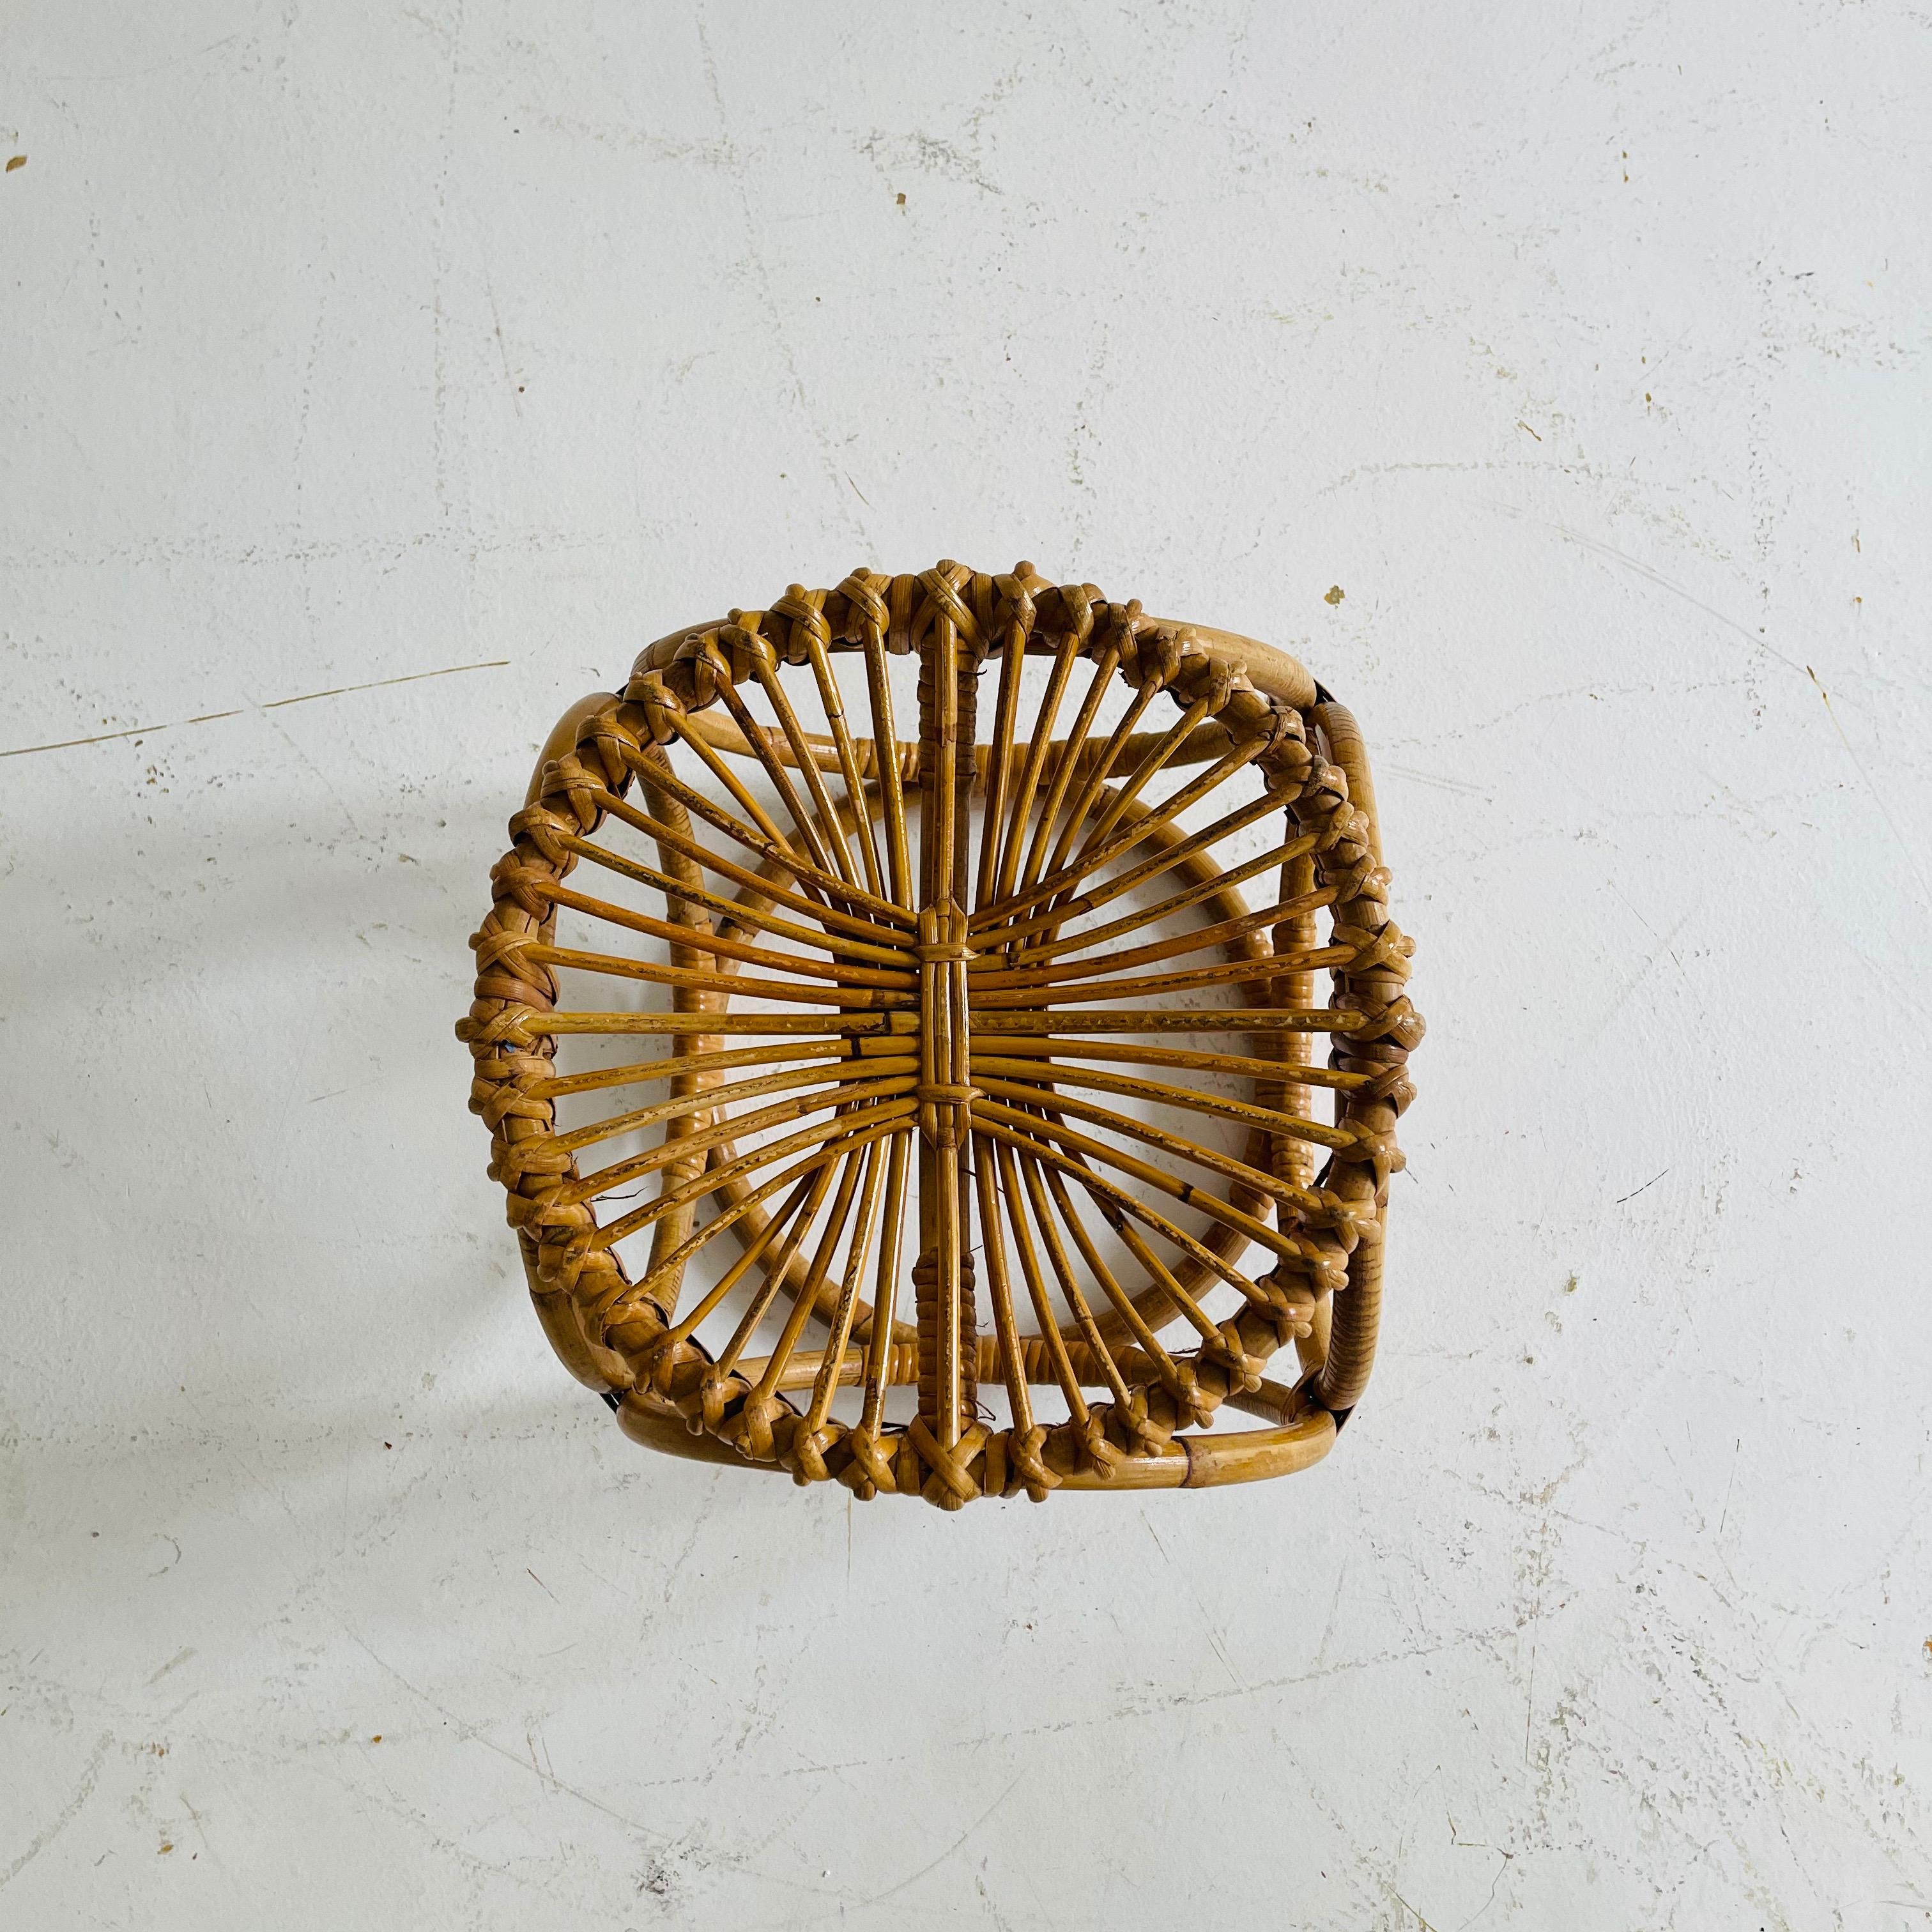 Bamboo Style Woven Rattan Wicker Stool, Italy, 1970s For Sale 5